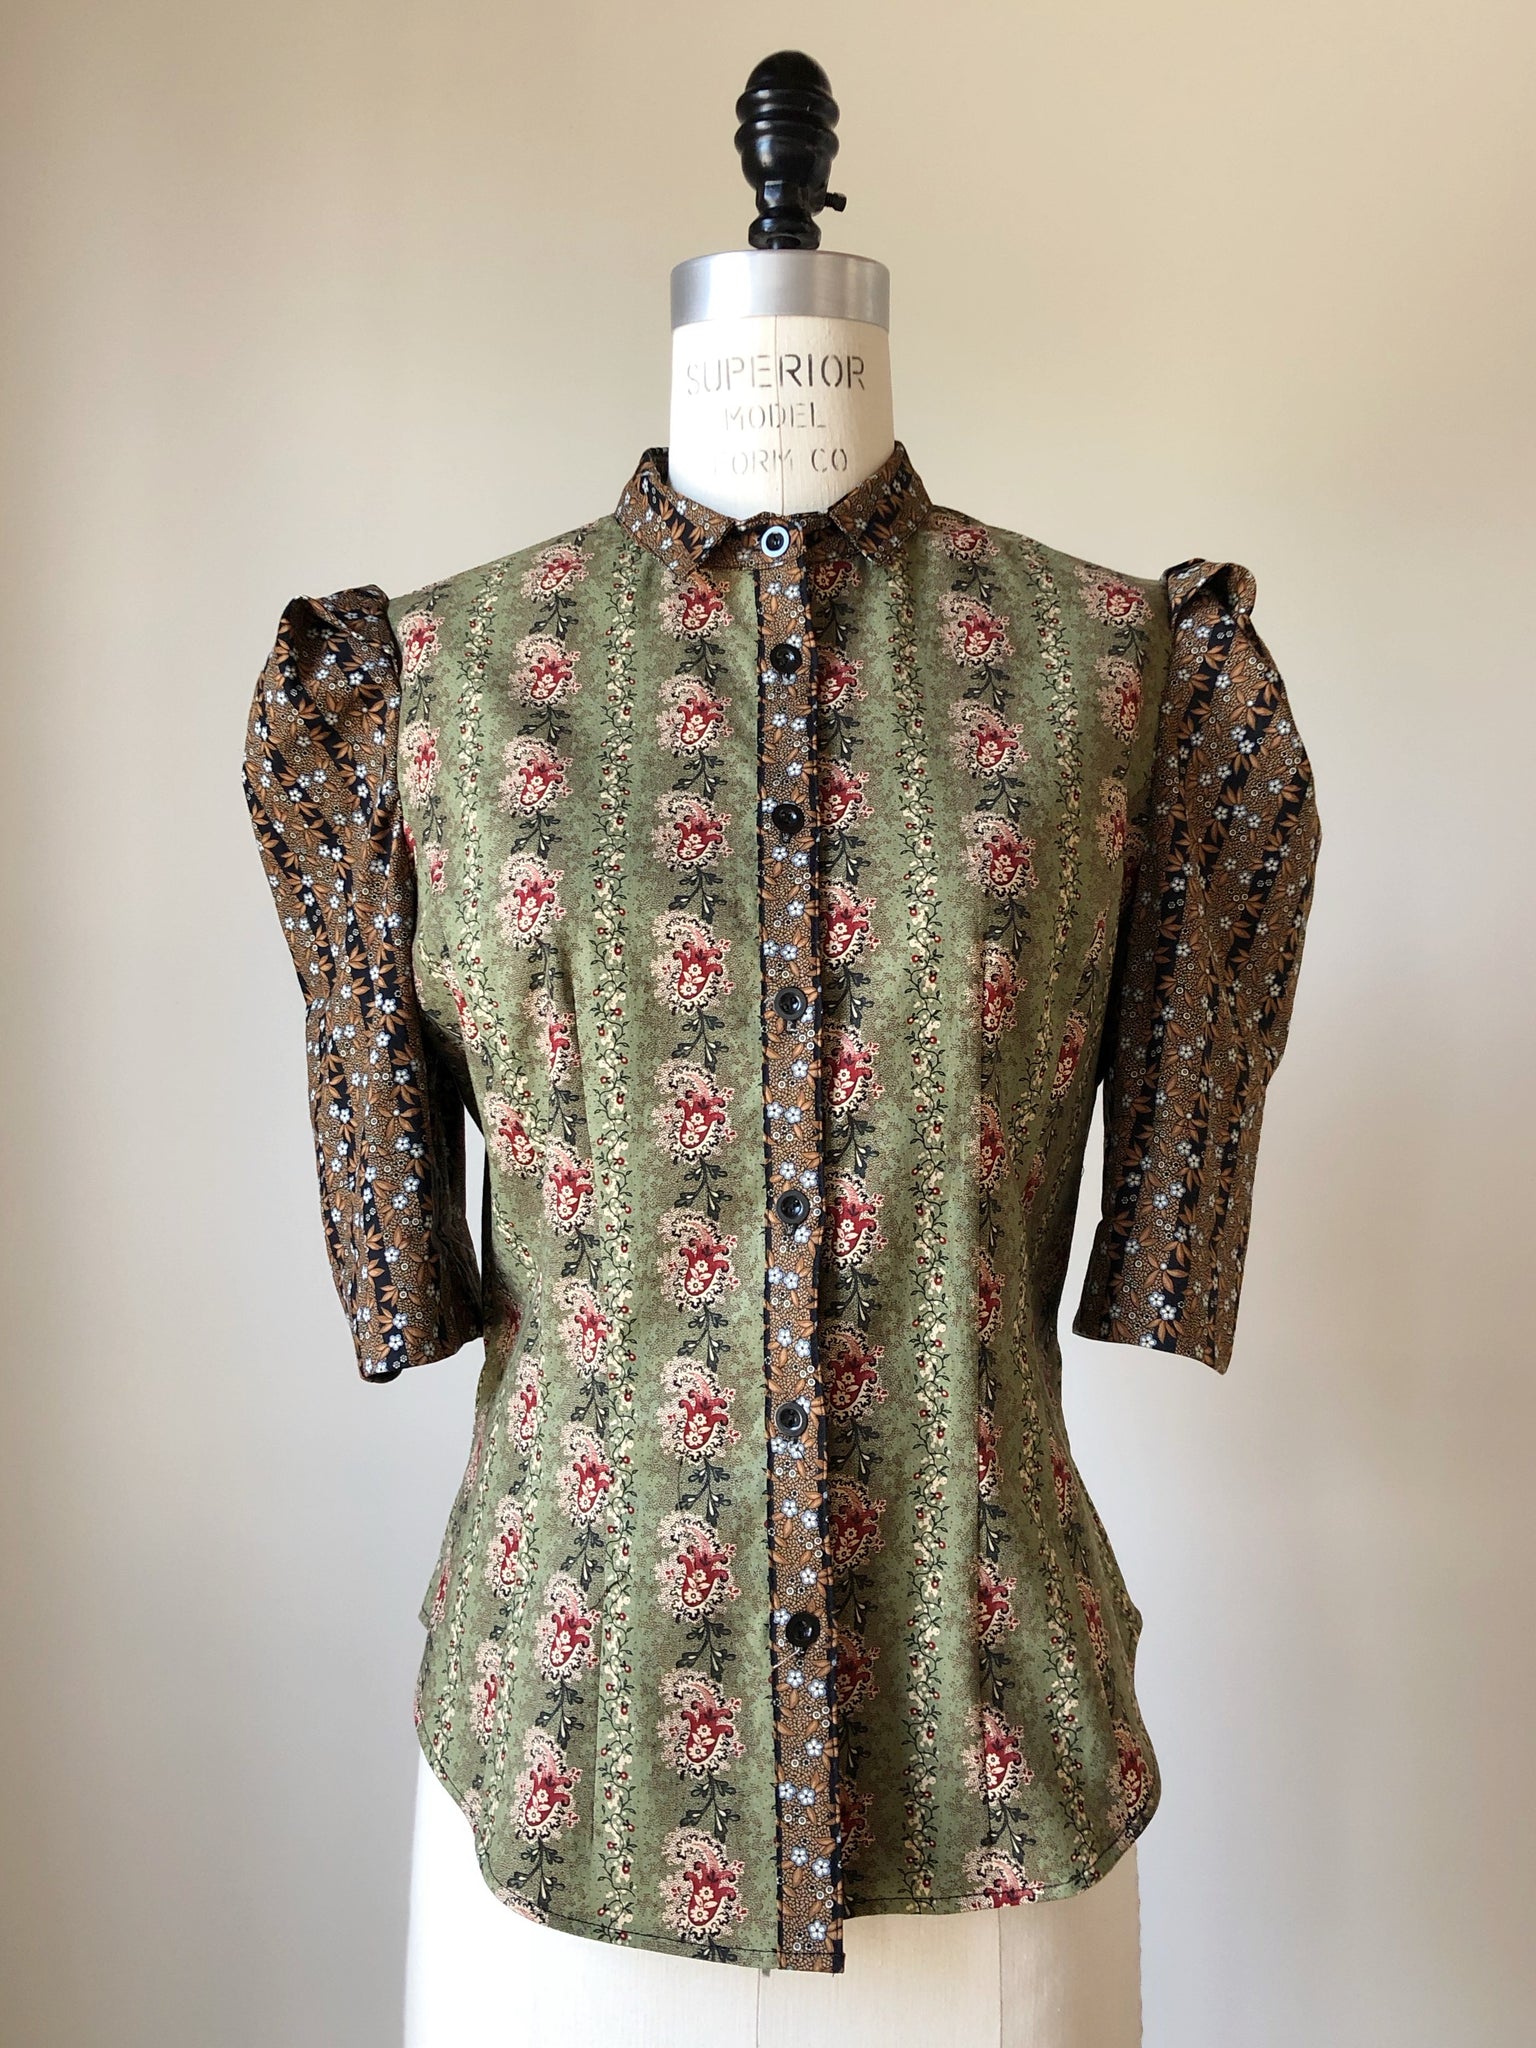 Lillian work shirt in 19th century reproduction prints #4